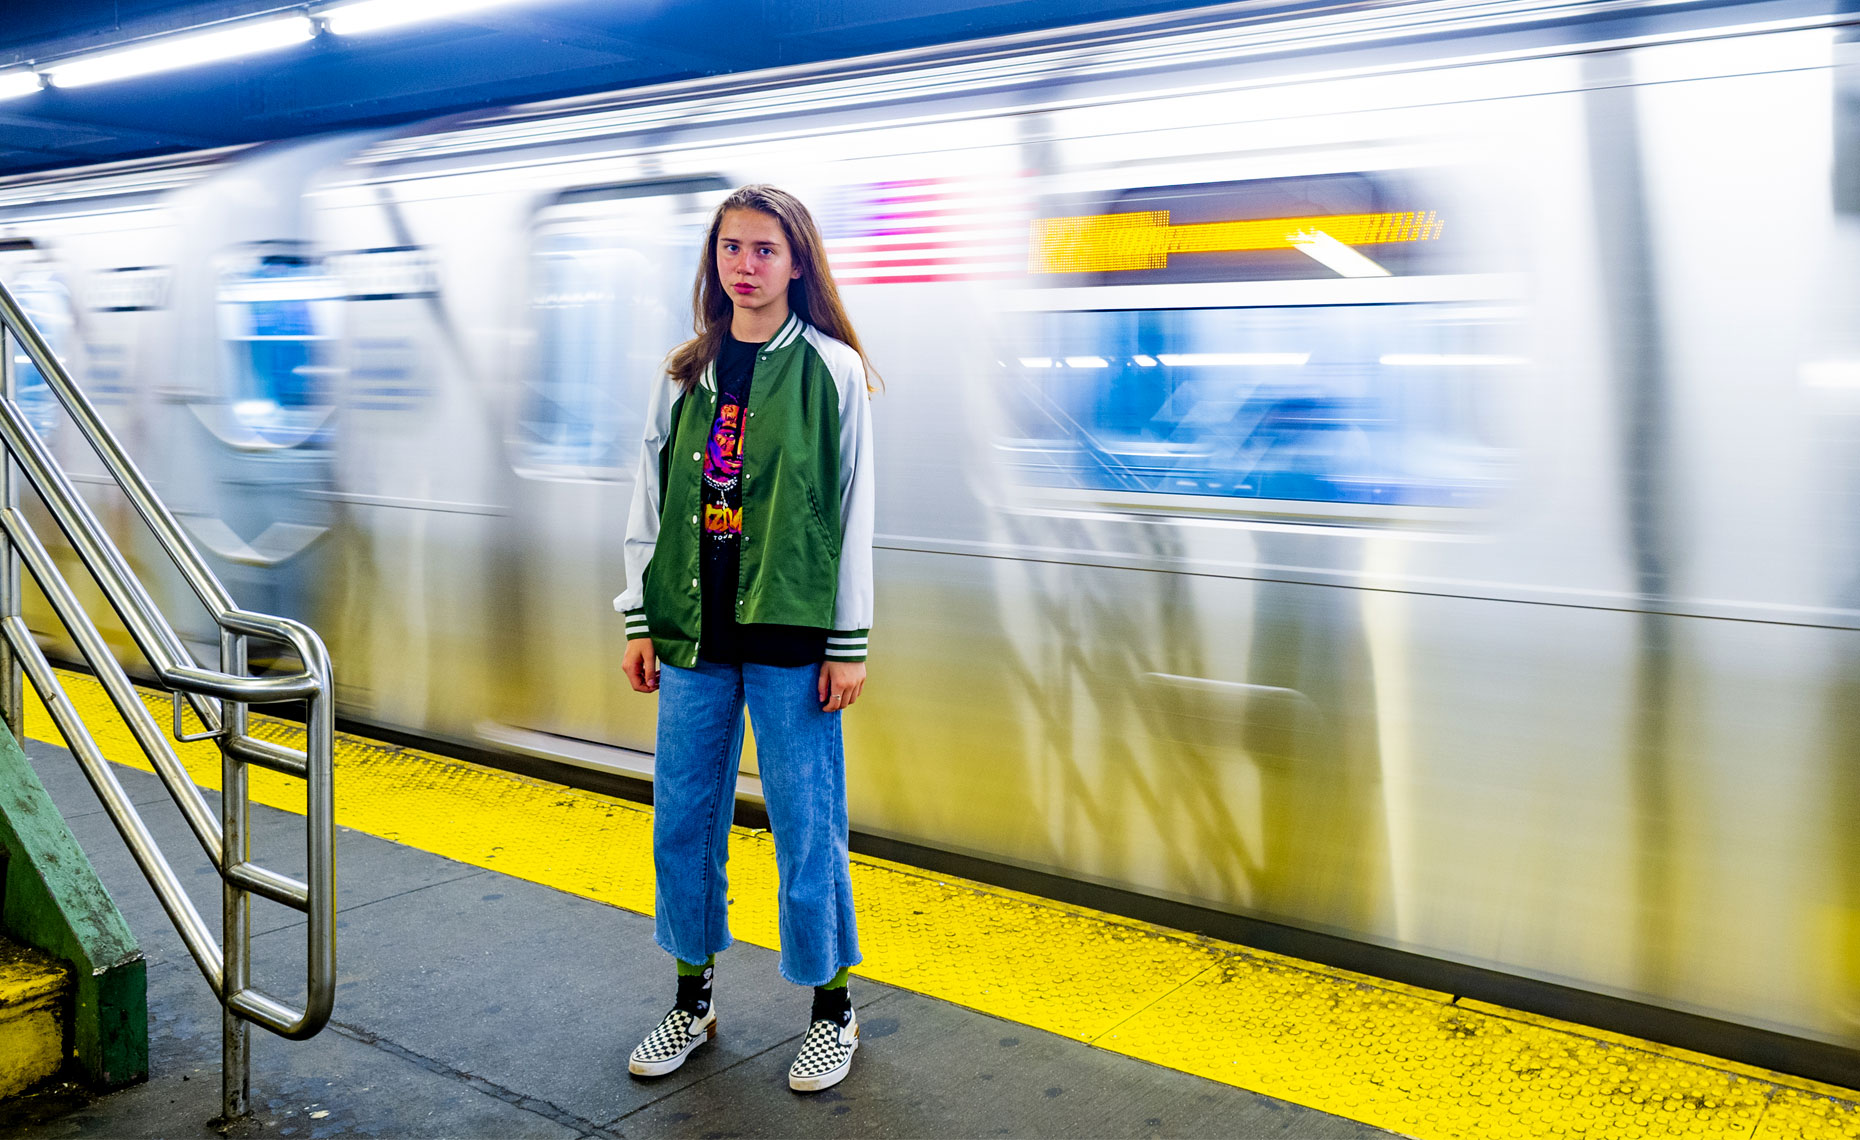 Raleigh fashion portrait Photography NYC Subway